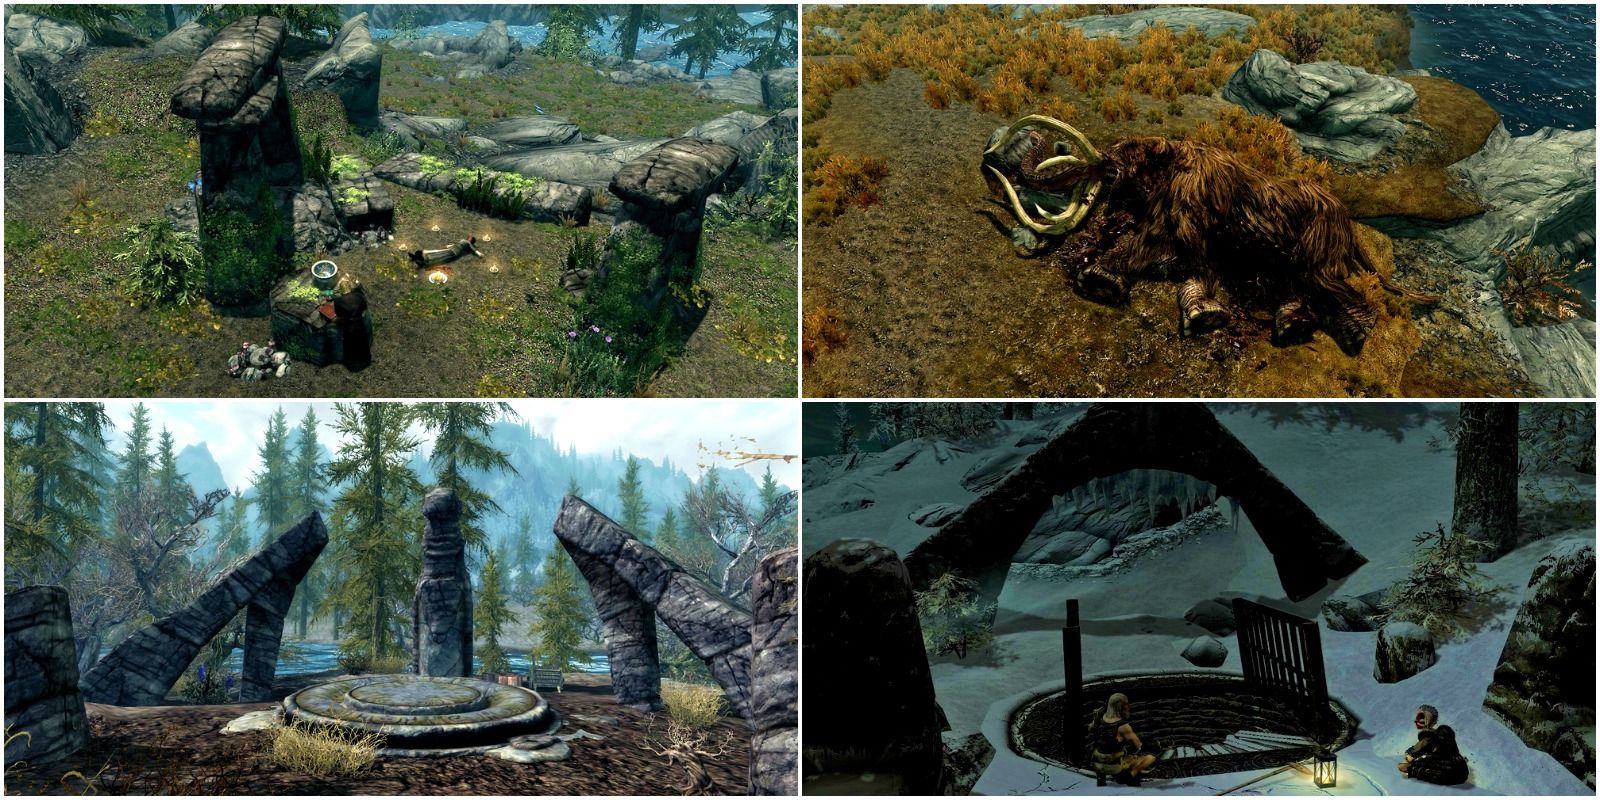 top left: necromancer ritual. top right: dead mammoth. bottom right: ghost barrow with 2 bandits. bottom left: summoning stone structure